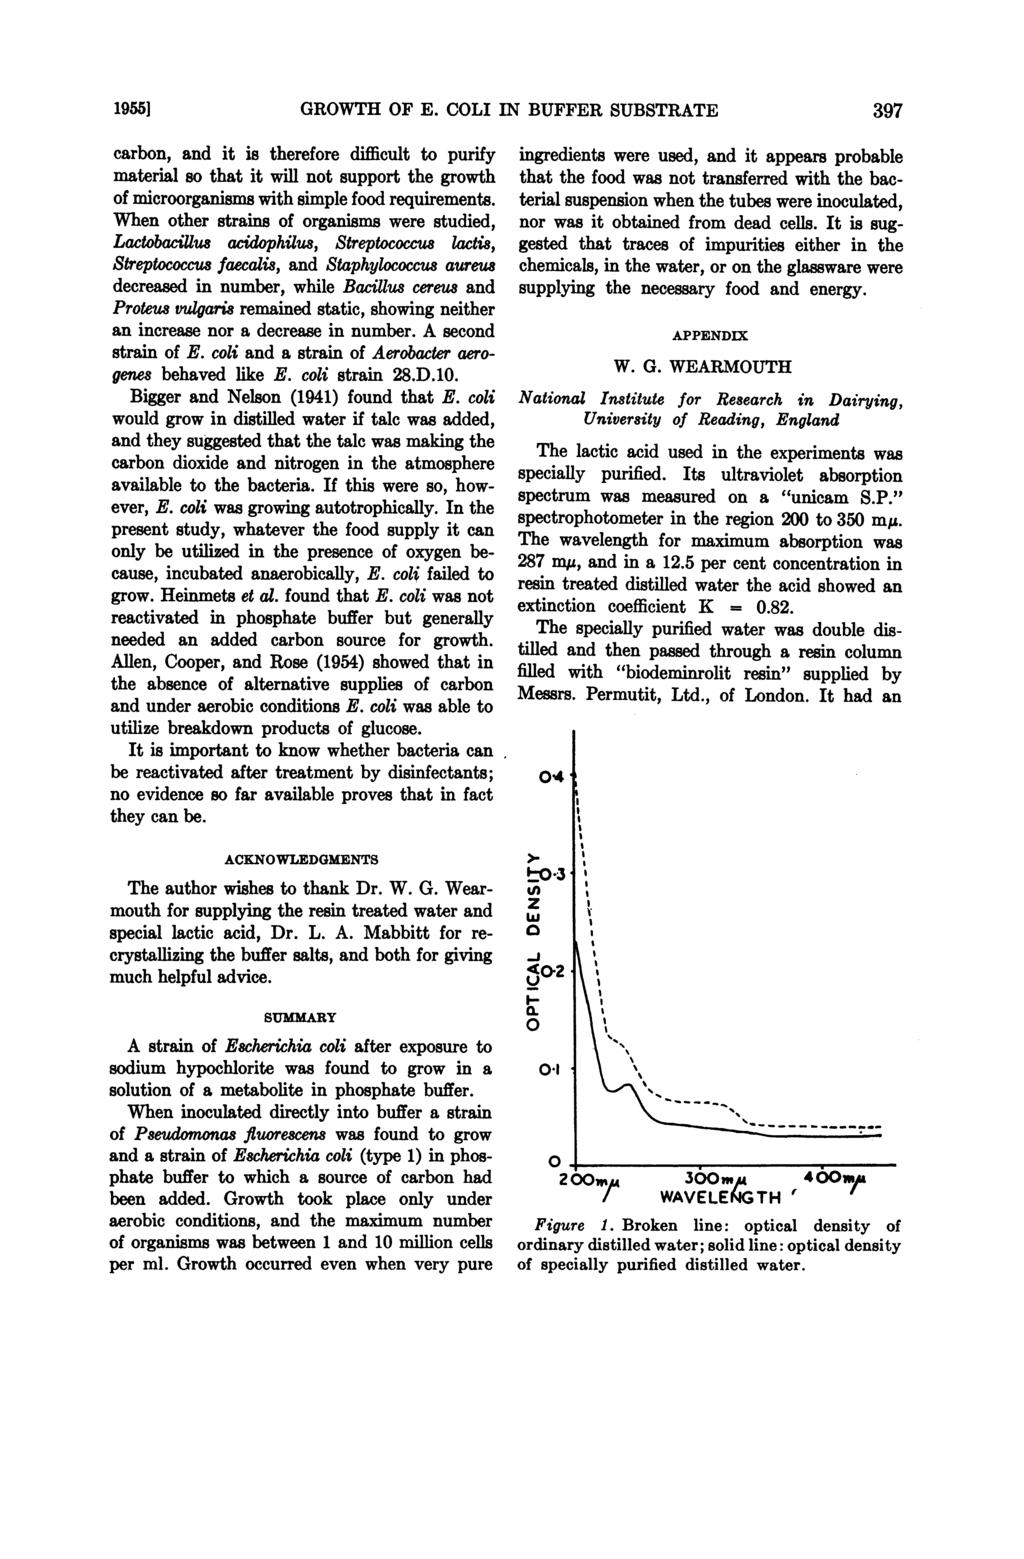 19551 GROWTH OF E. COLI IN BUFFER SUBSTRATE 397 carbon, and it is therefore difficult to purify material so that it will not support the growth of microorganisms with simple food requirements.